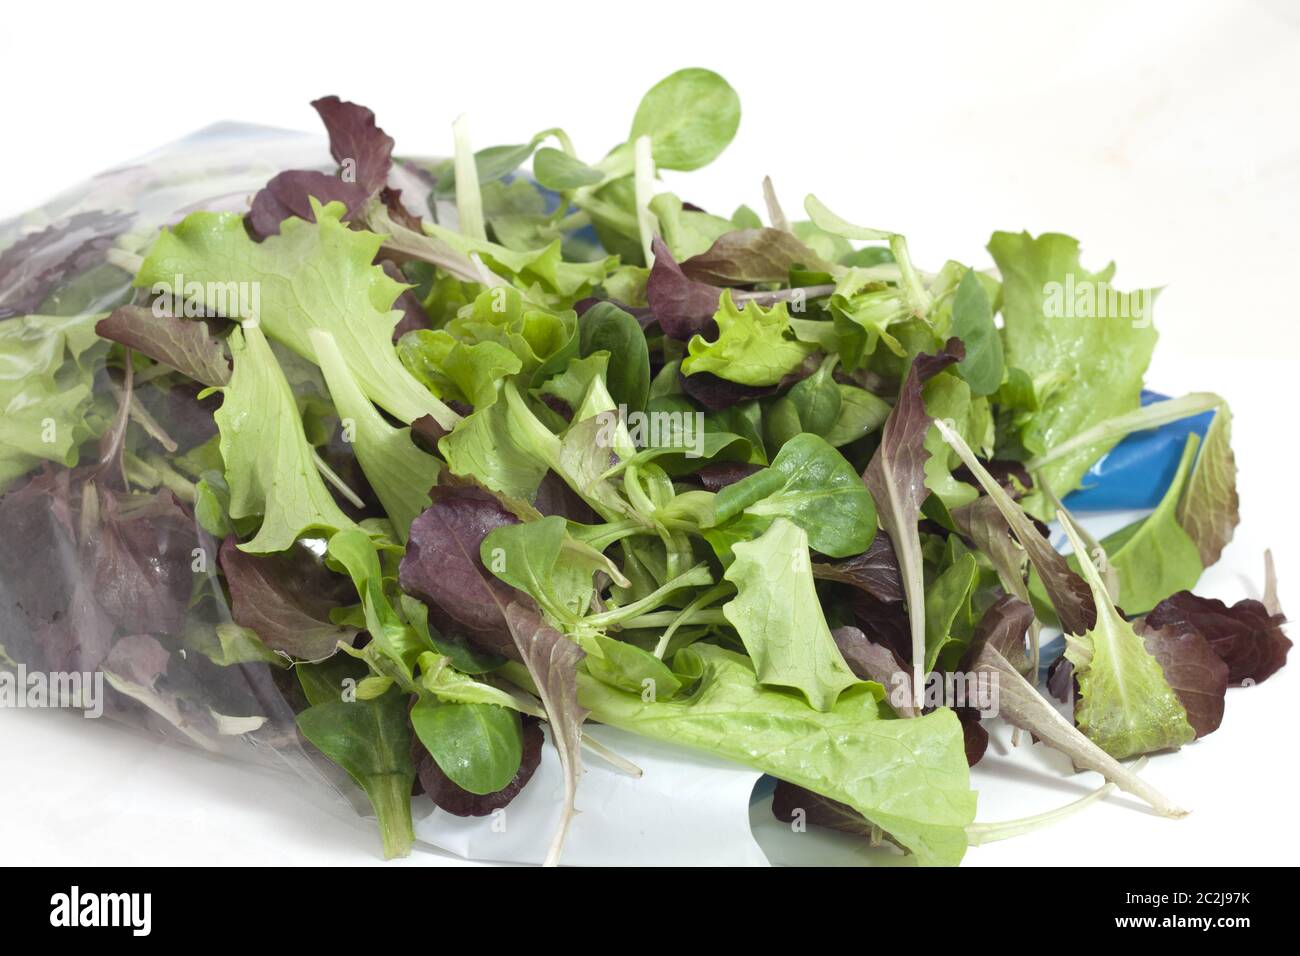 two-colored salad with freshness-saving package Stock Photo